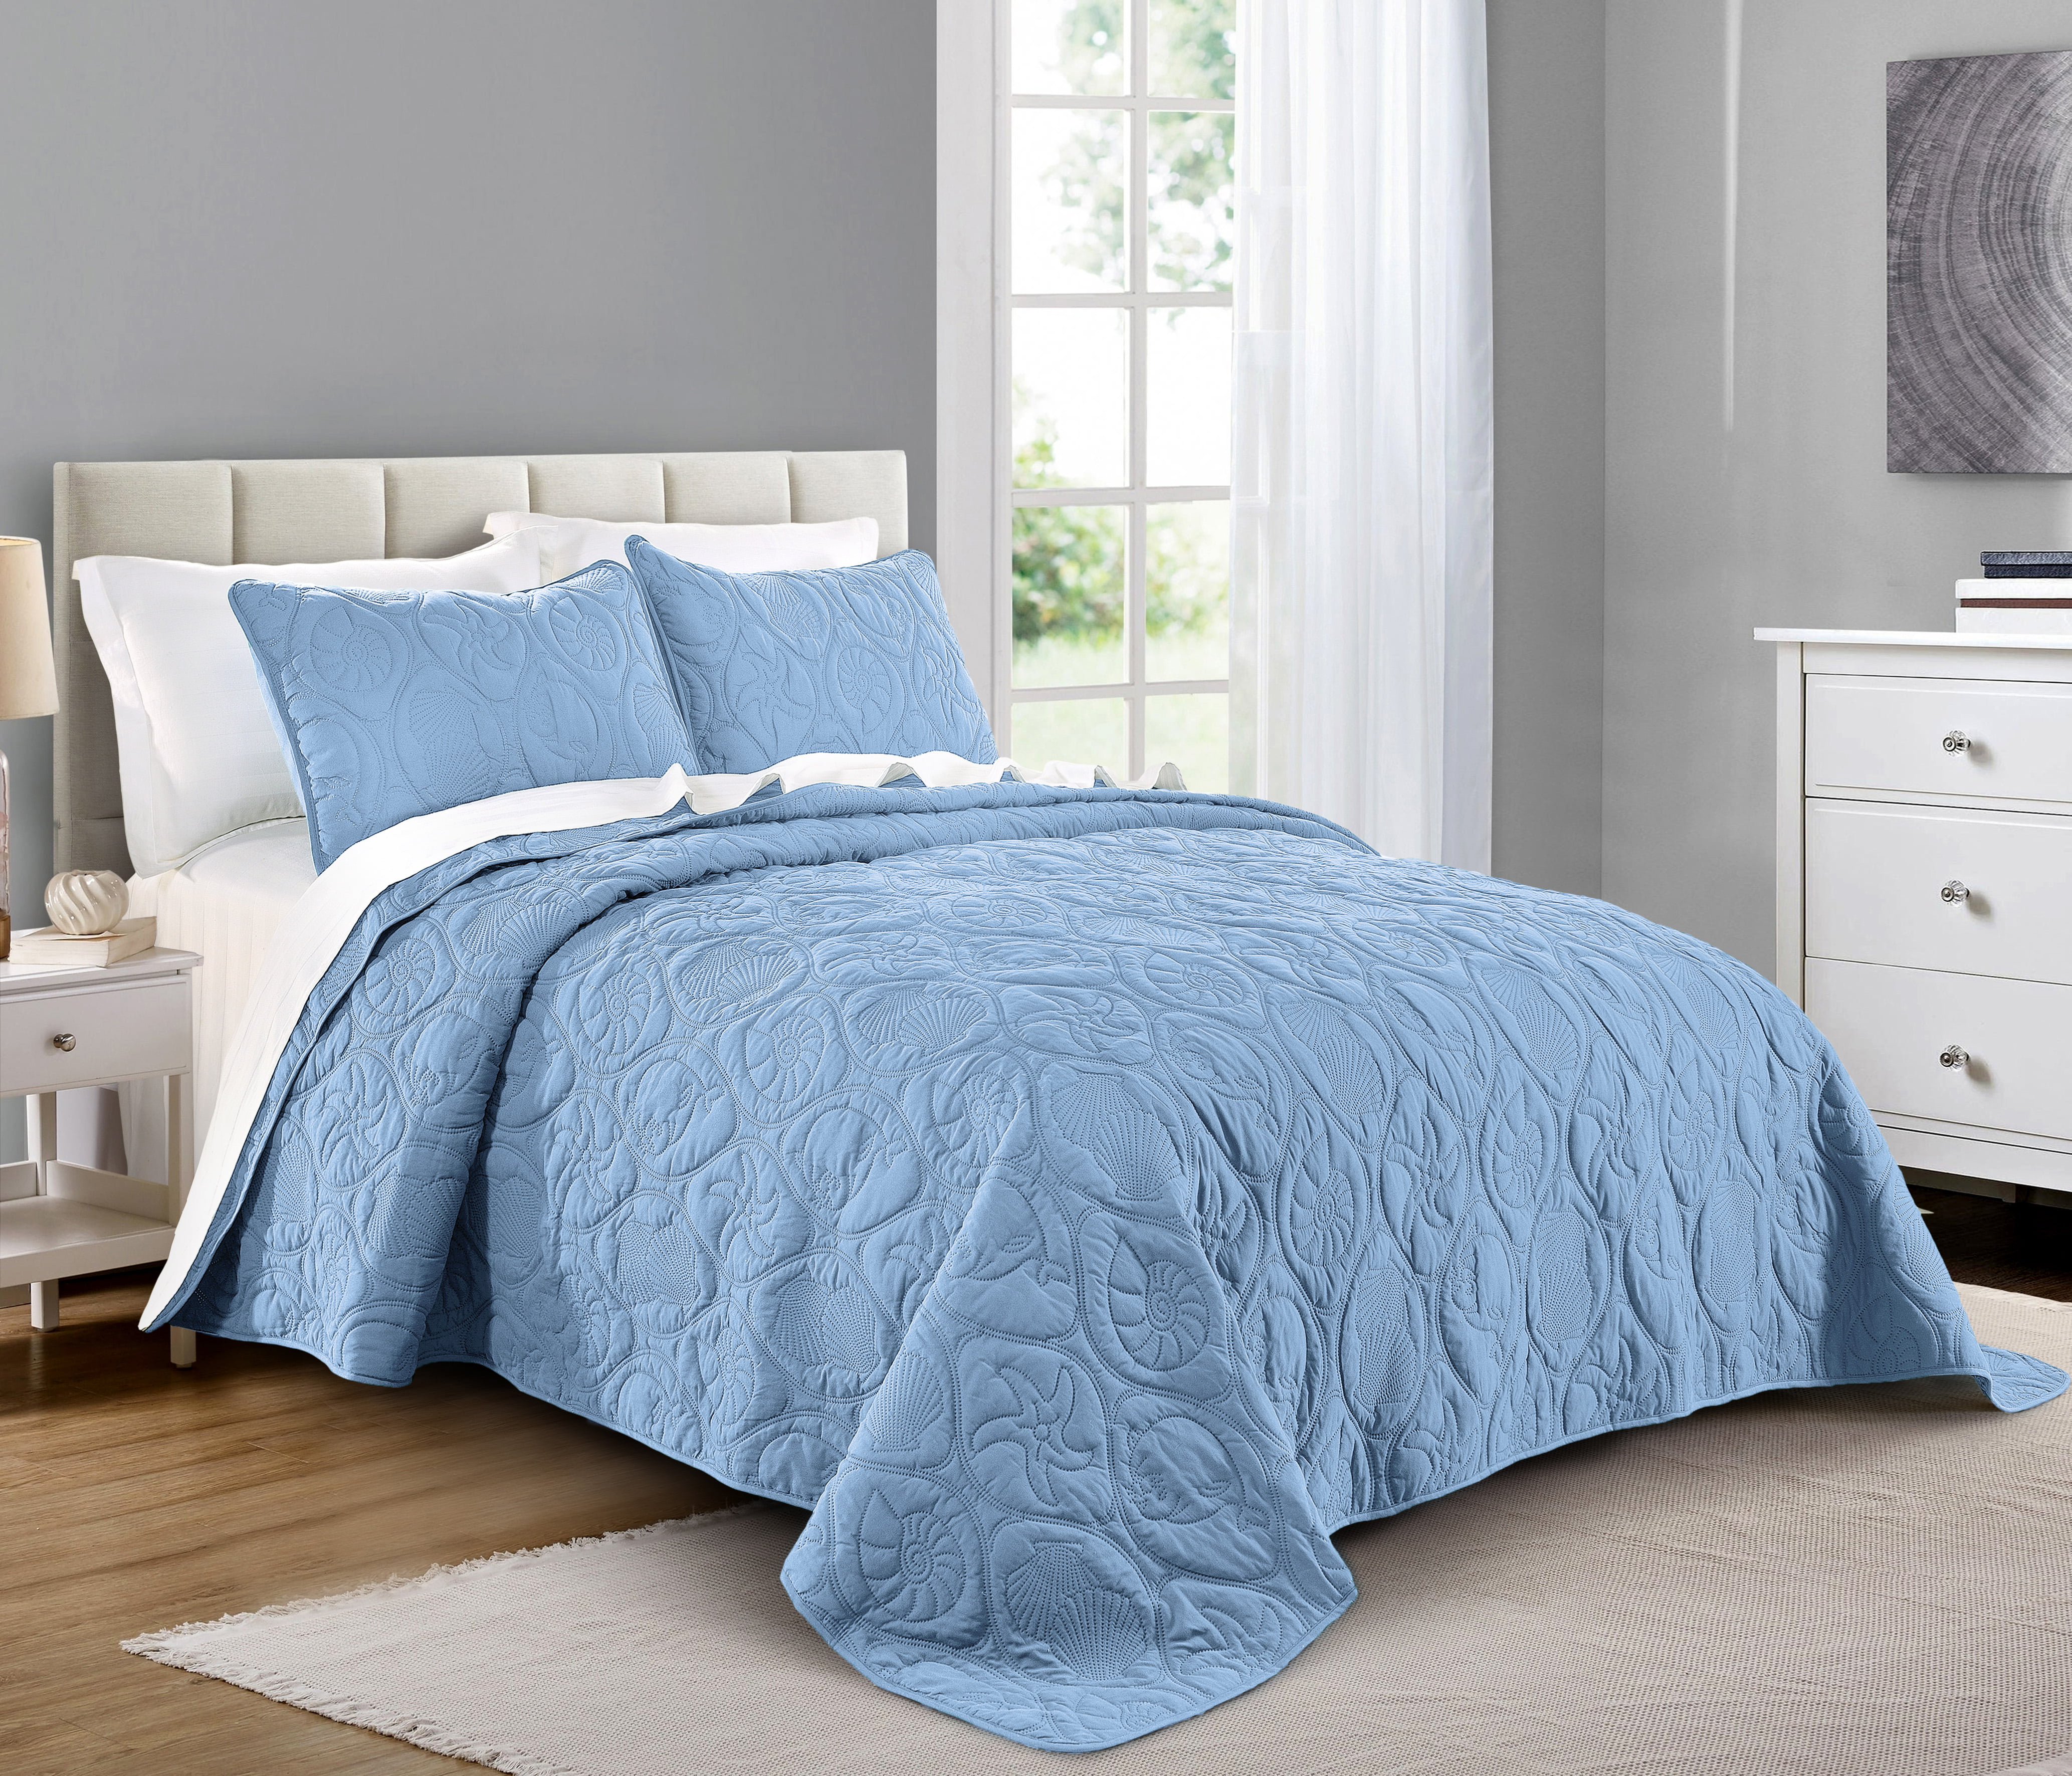 Quilt Set Full/Queen Size Skyblue - Oversized Bedspread - Soft